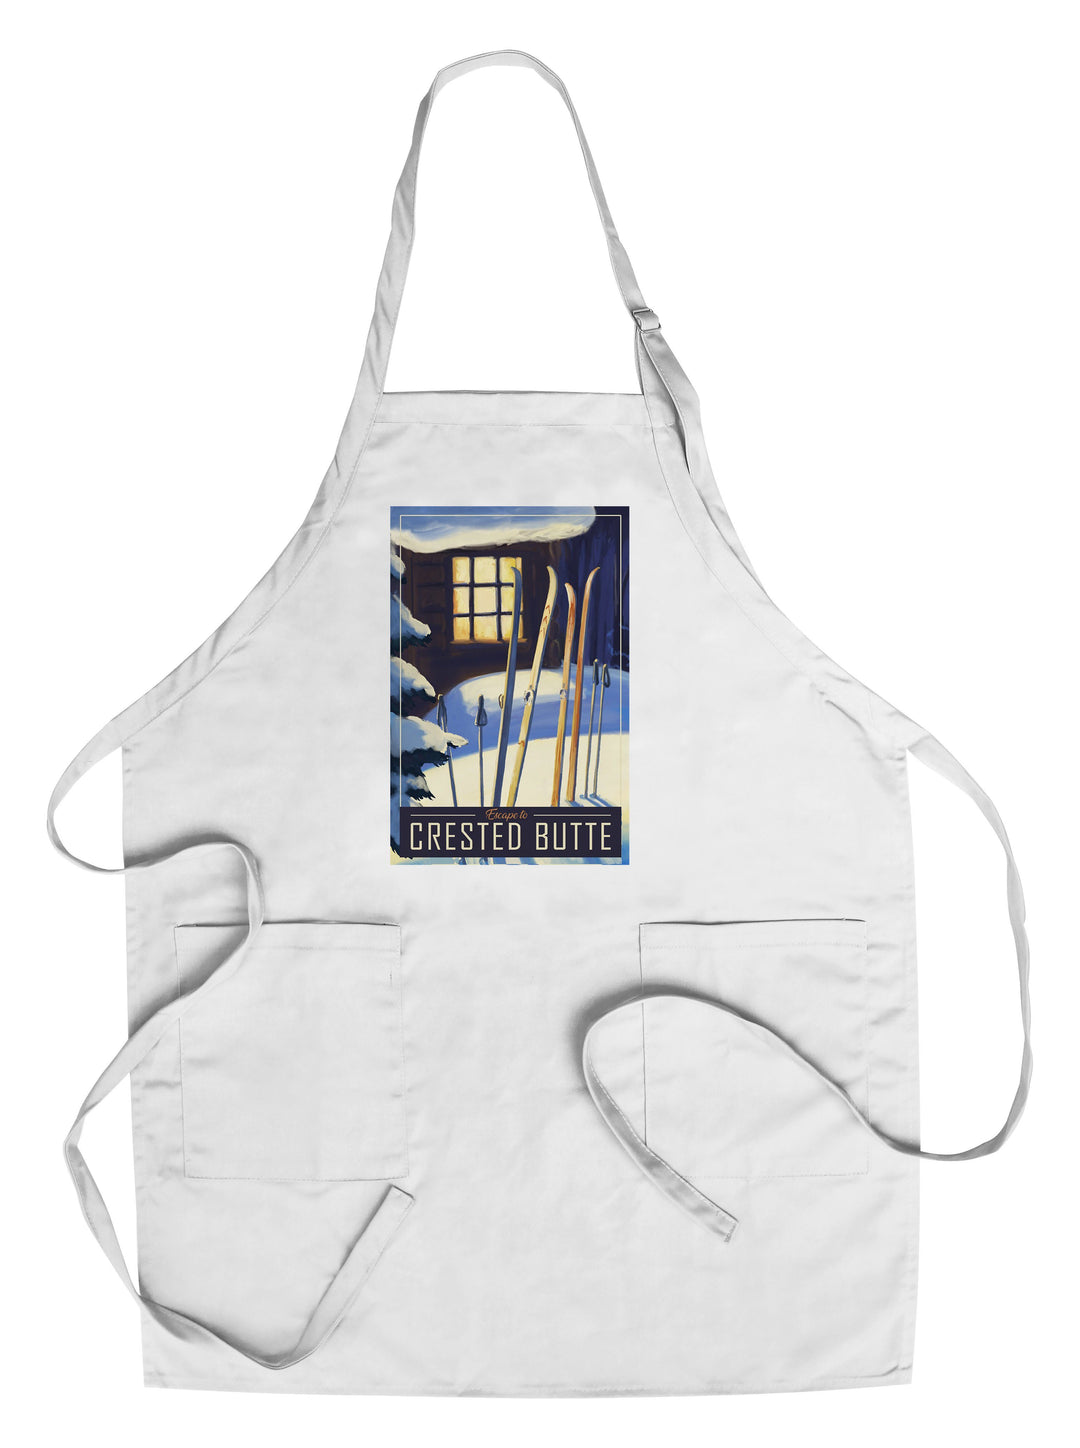 Crested Butte, Colorado, skis in snow, Lantern Press Artwork, Towels and Aprons Kitchen Lantern Press Chef's Apron 